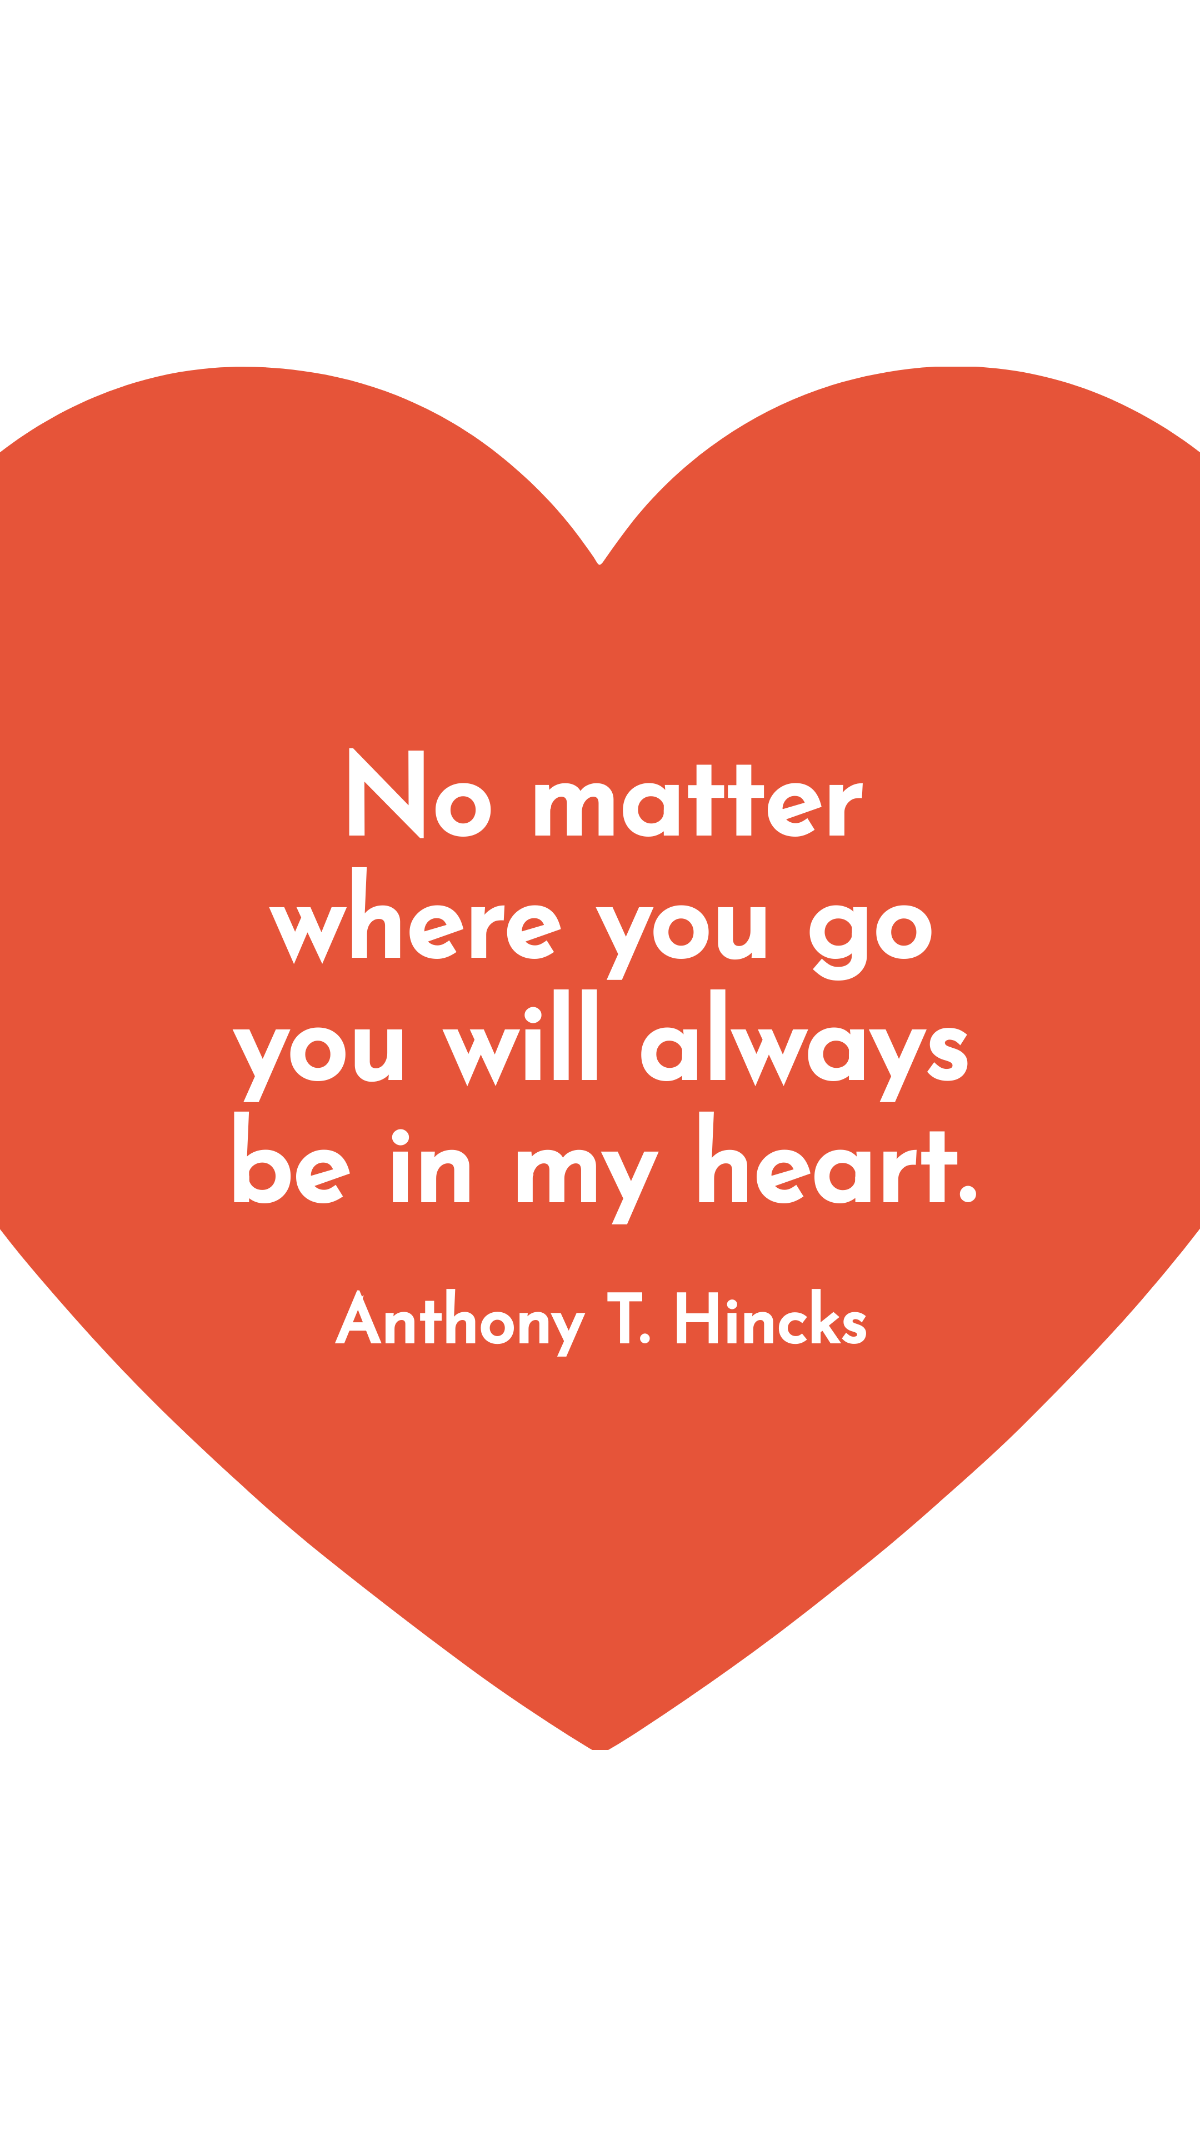 Anthony T. Hincks - No matter where you go you will always be in my heart.